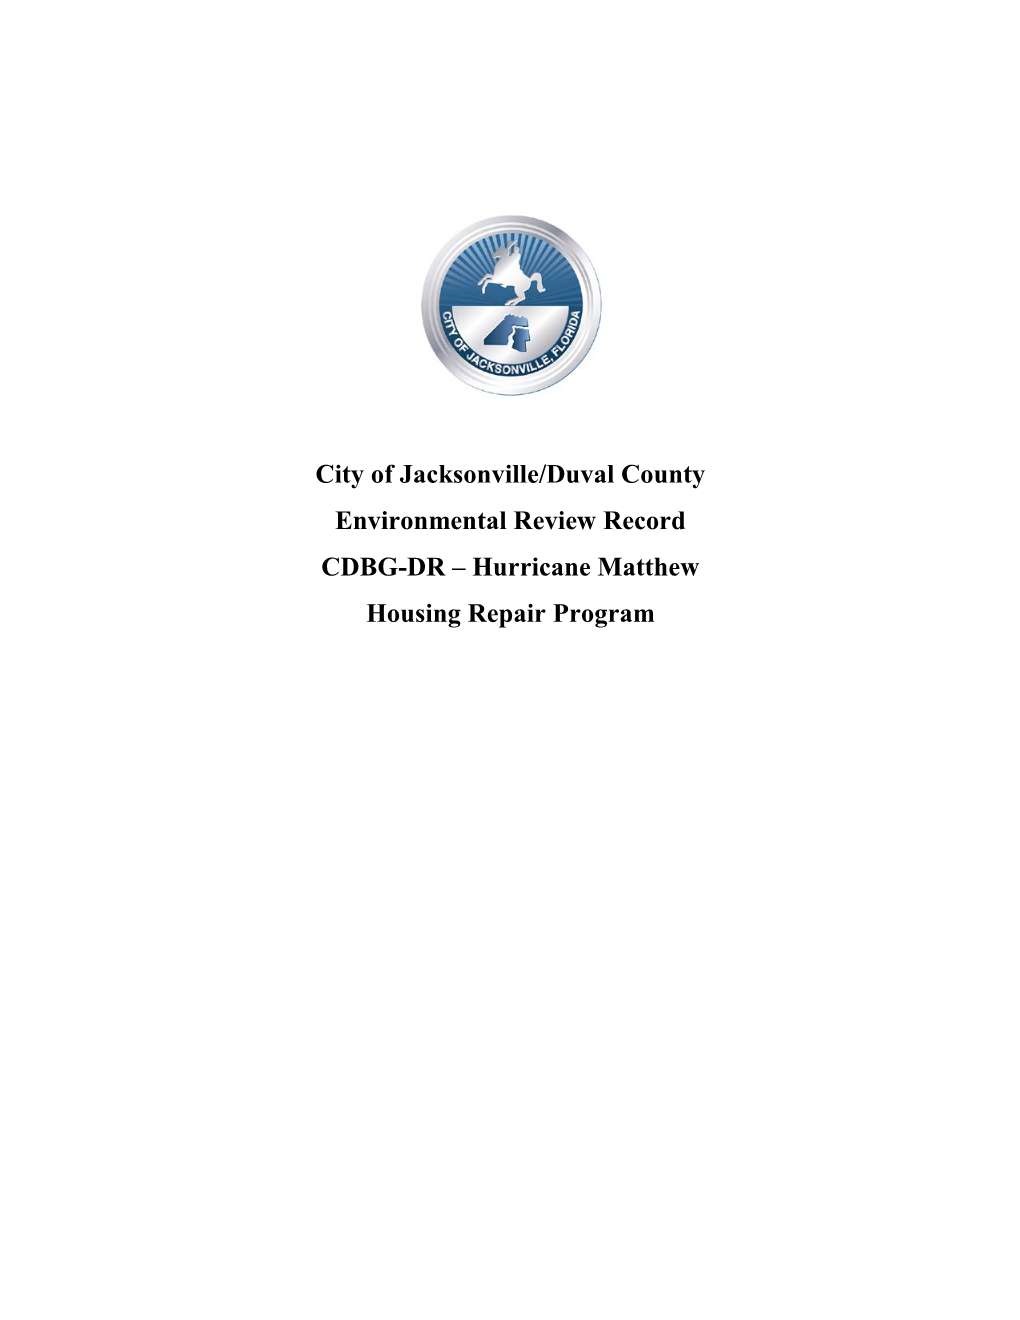 City of Jacksonville/Duval County Environmental Review Record CDBG-DR – Hurricane Matthew Housing Repair Program Contents Scope of Work